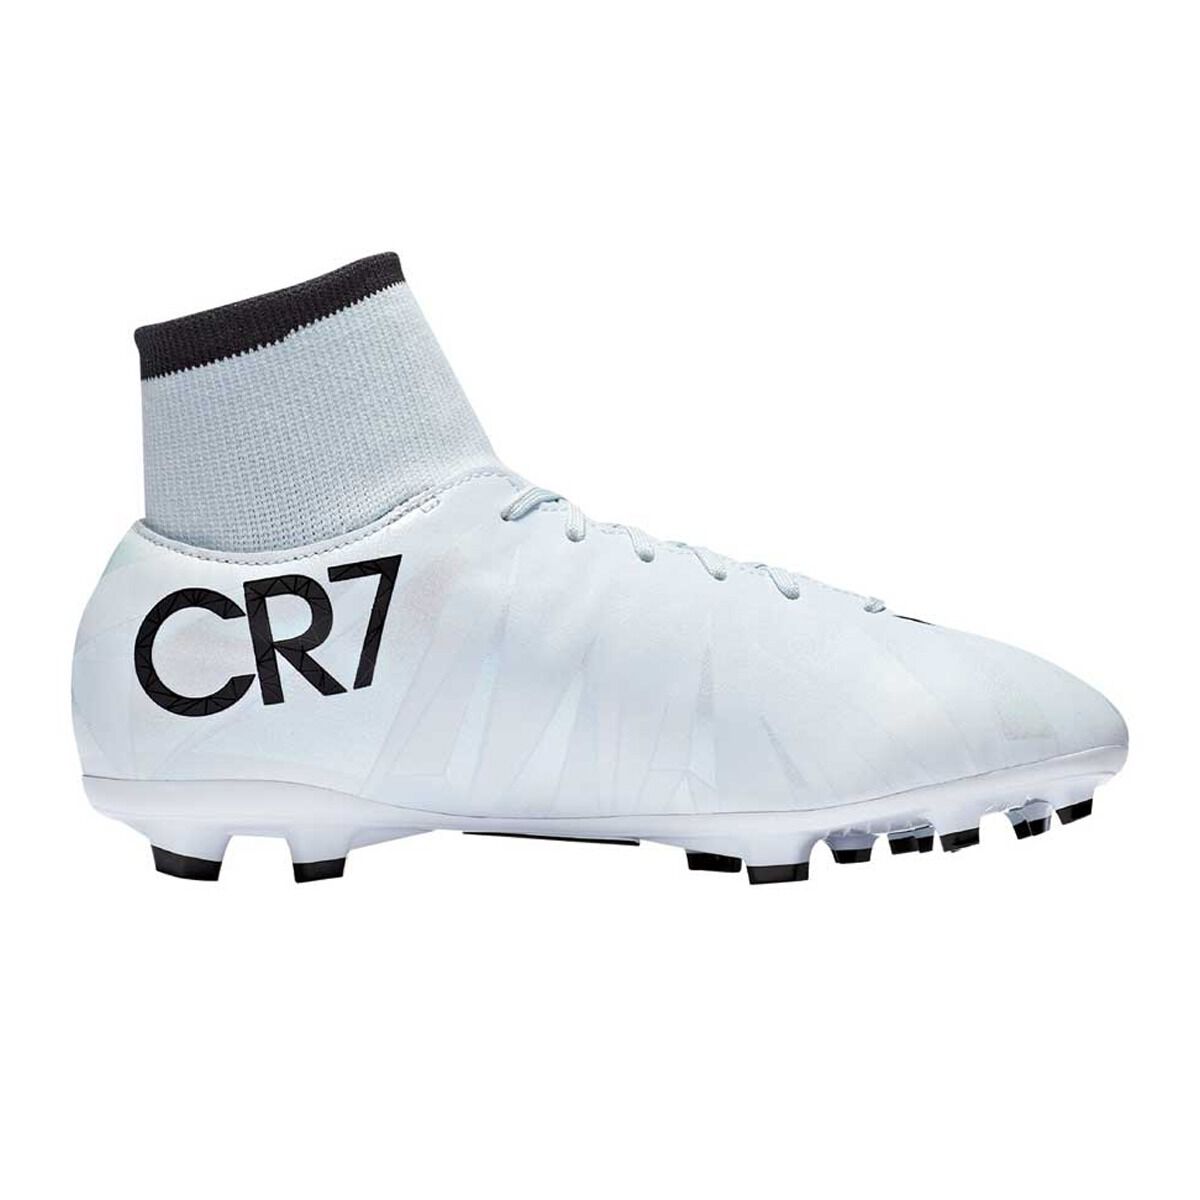 Nike Mercurial Superfly VI LVL UP CR7 Football Boots